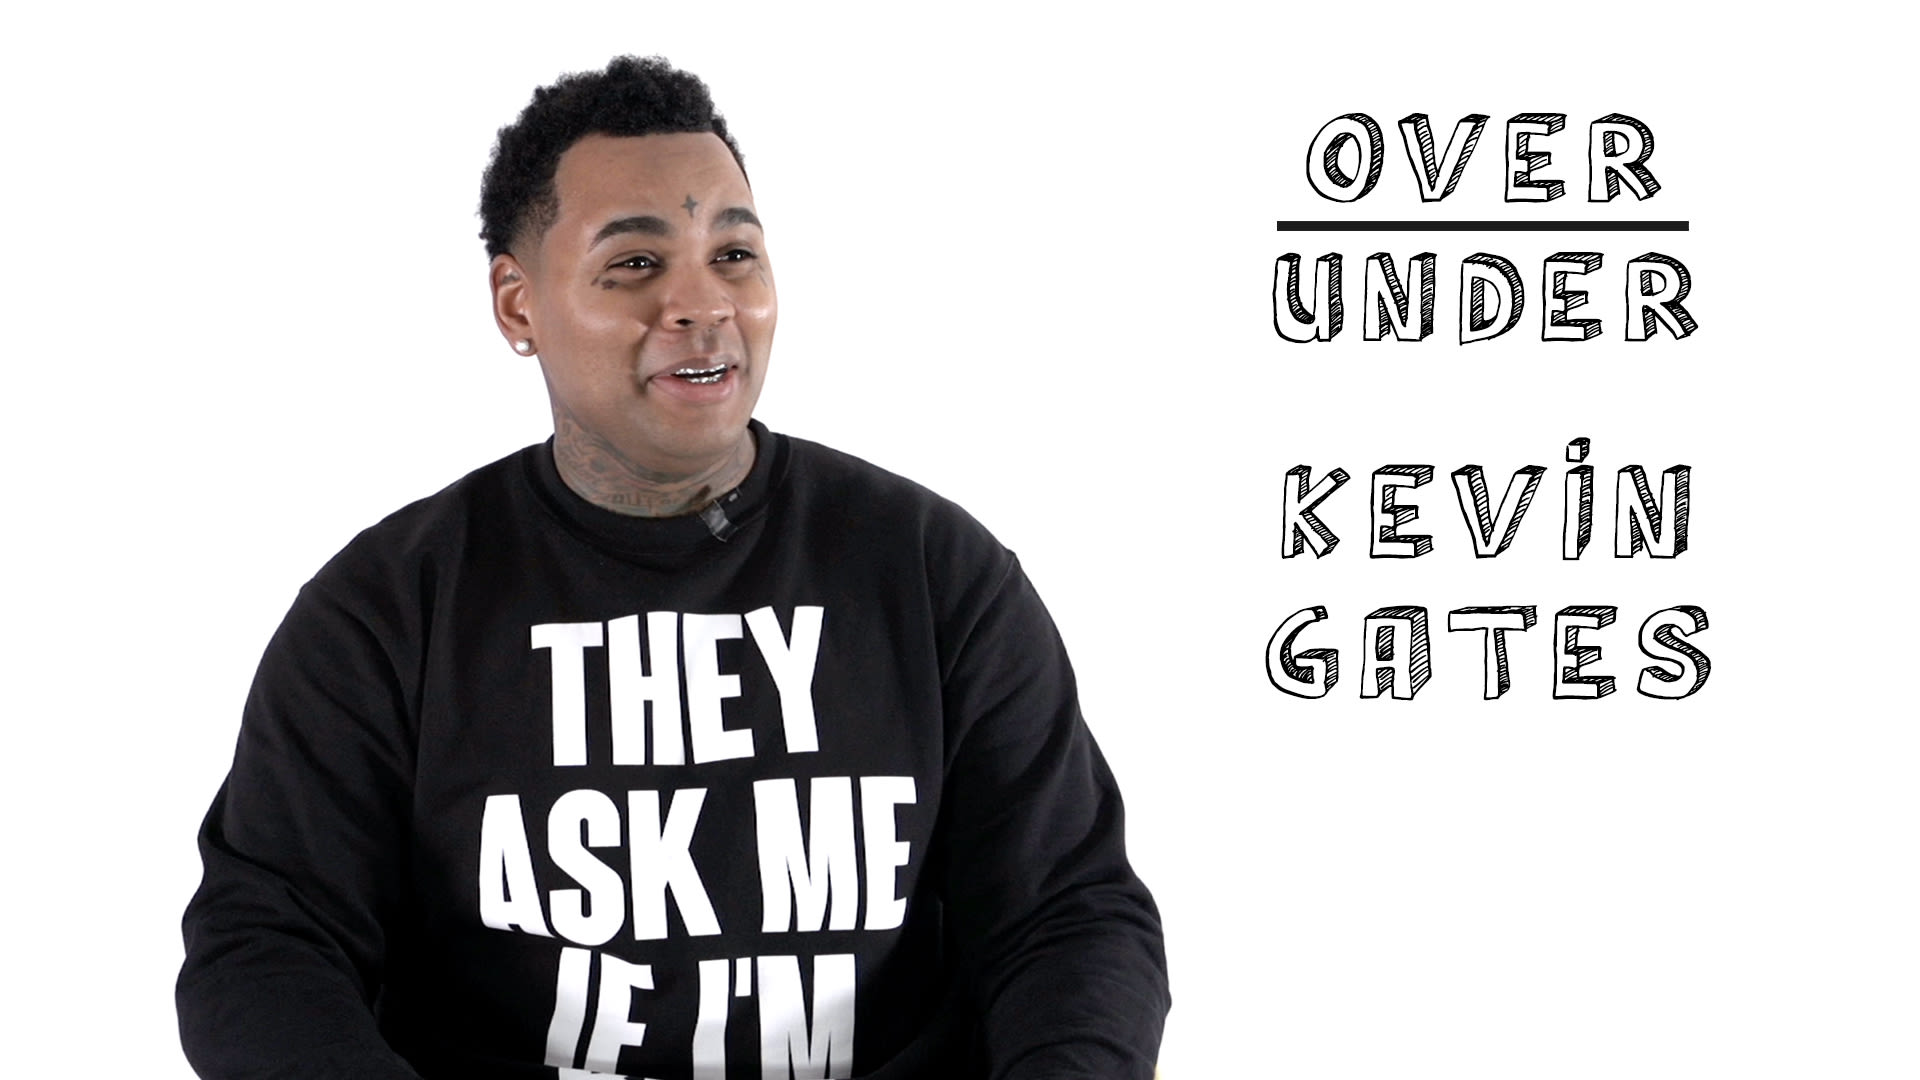 Watch Kevin Gates Rates Leonardo DiCaprio, Taylor Swift, and the Red Hot Chili Peppers Over/Under Over/Under Pitchfork